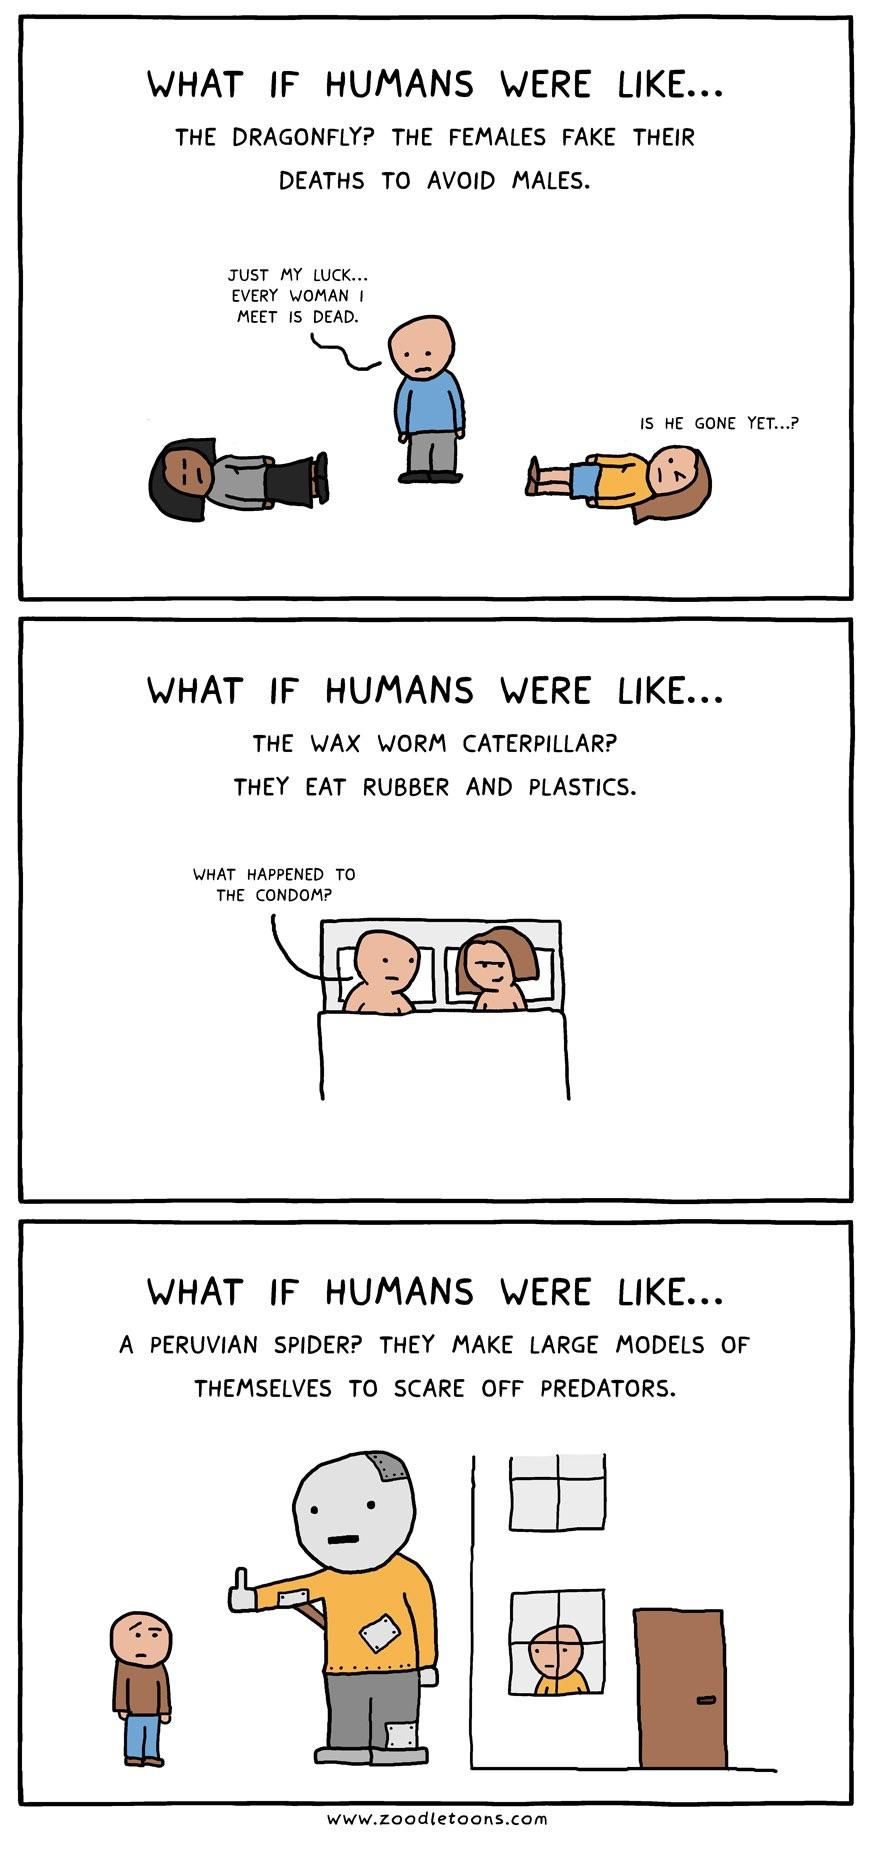 What If Humans Were More Like Peruvian Spiders...?